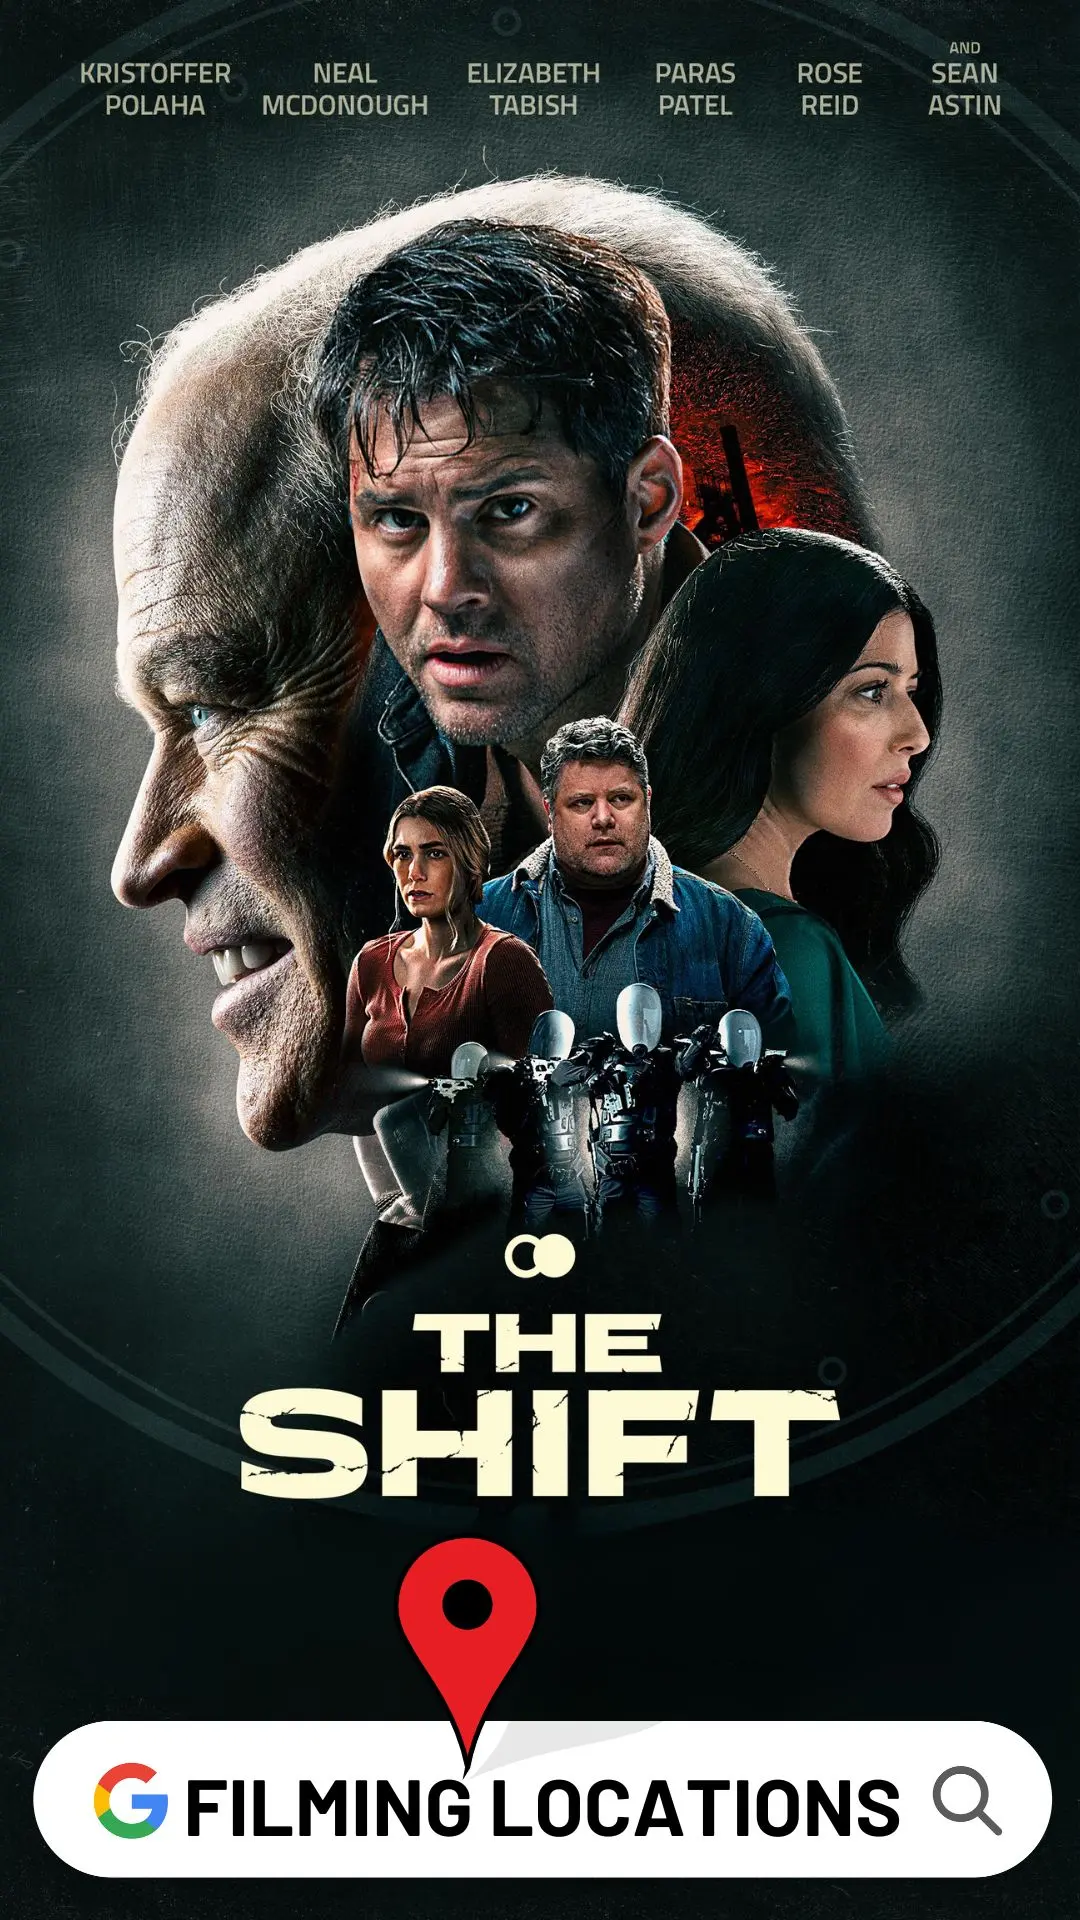 The Shift Filming Locations